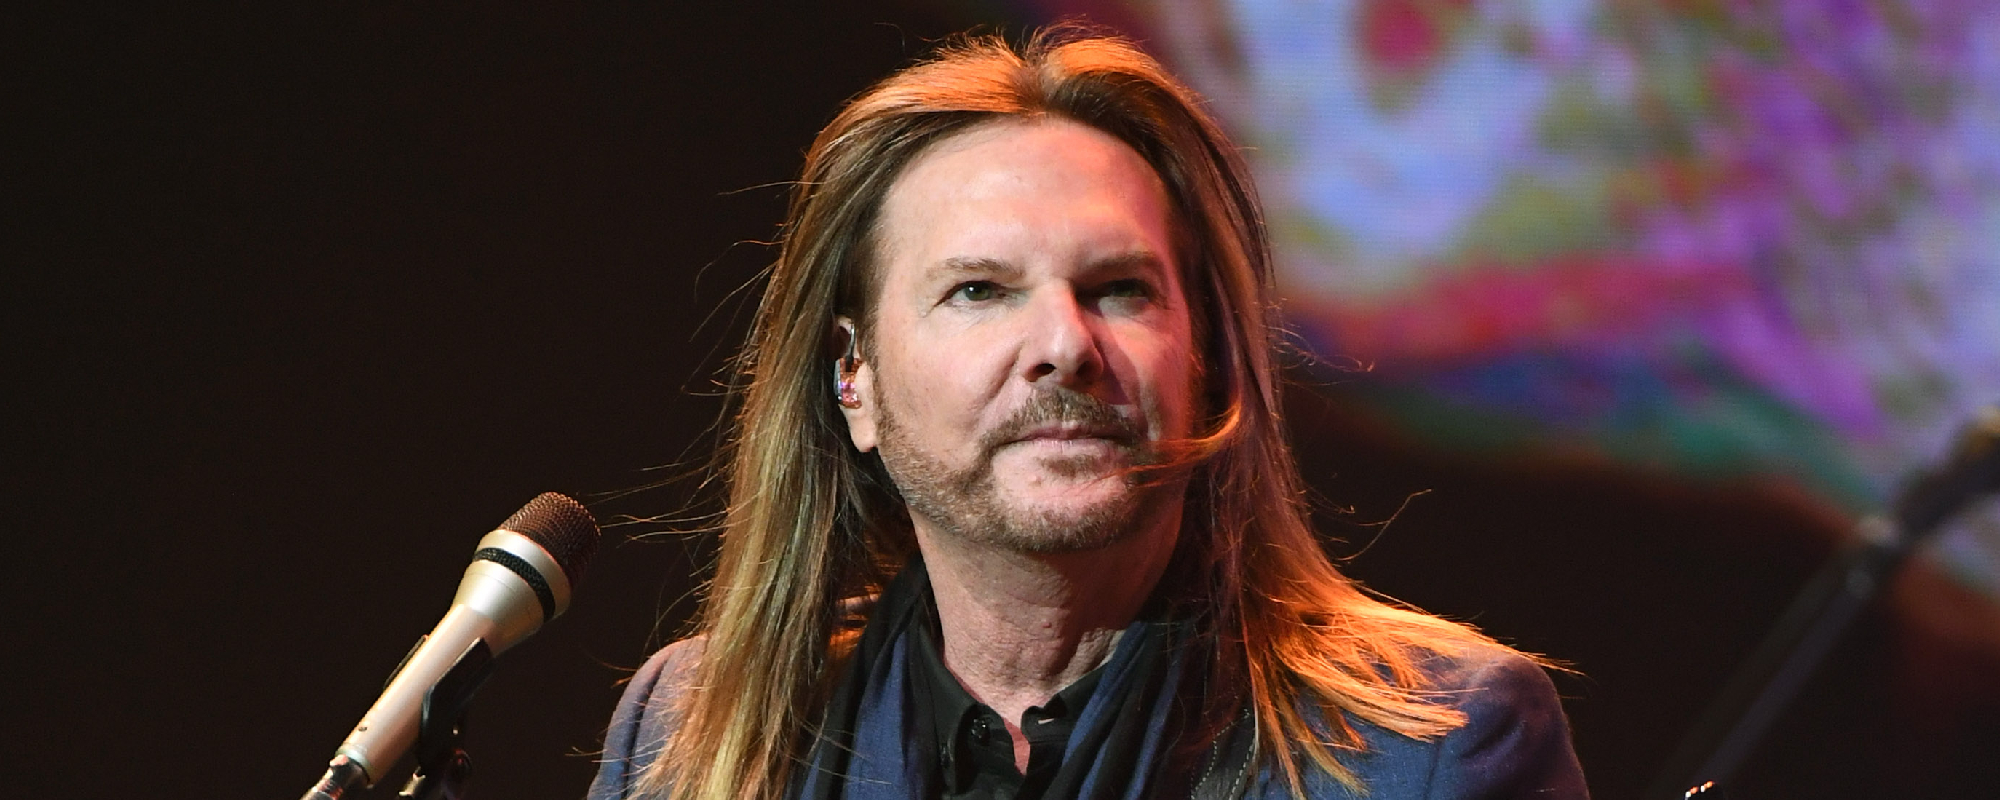 Styx Bassist Ricky Phillips Announces His Departure From the Band After Two Decades